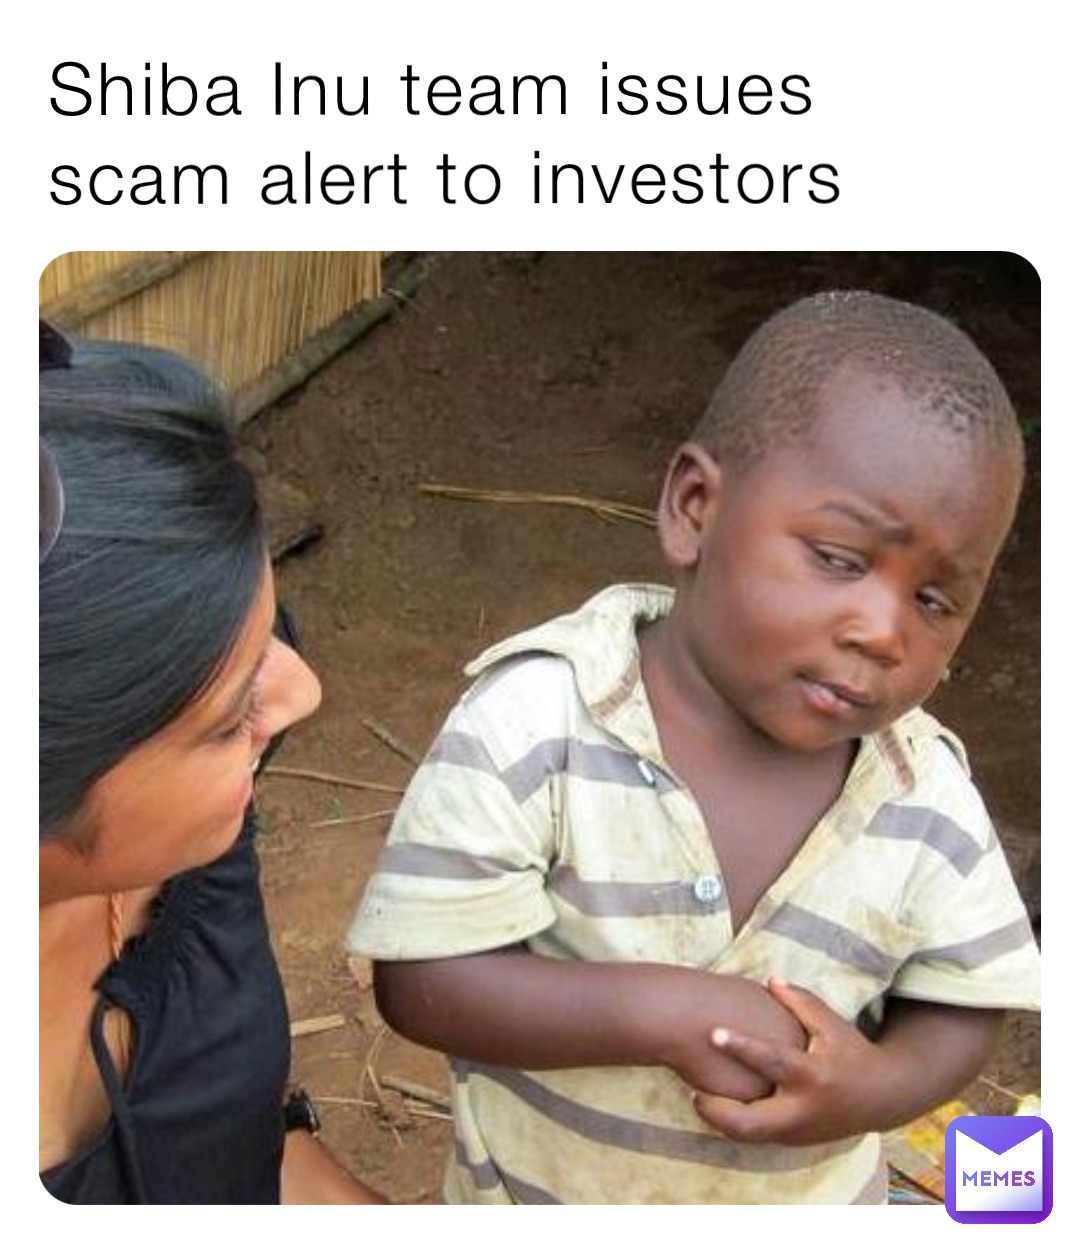 Shiba Inu team issues scam alert to investors Shiba Inu team issues scam alert to investors